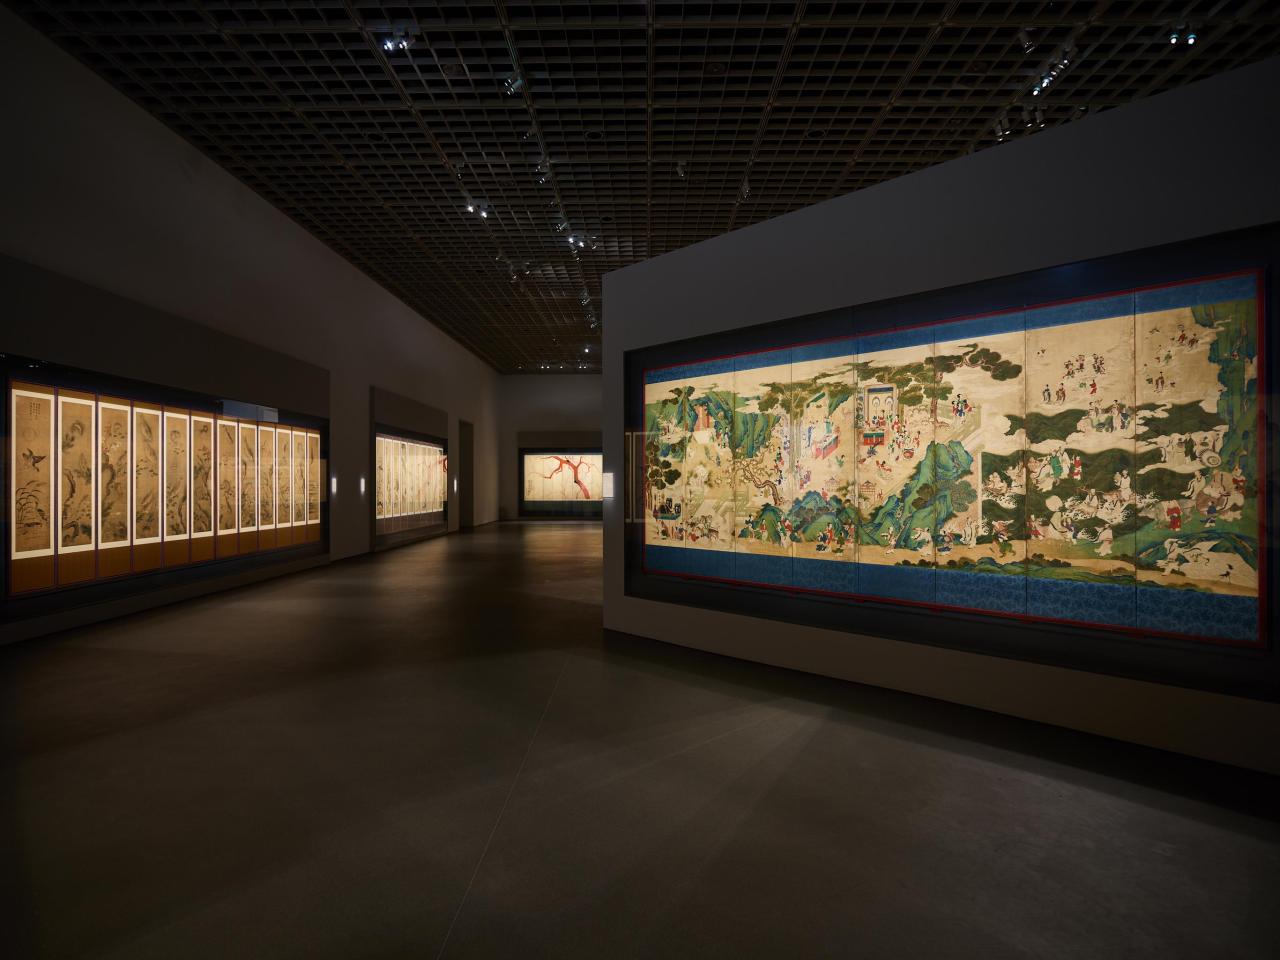 Installation view of “APMA, Chapter Two” at the Amorepacific Museum of Art (APMA)